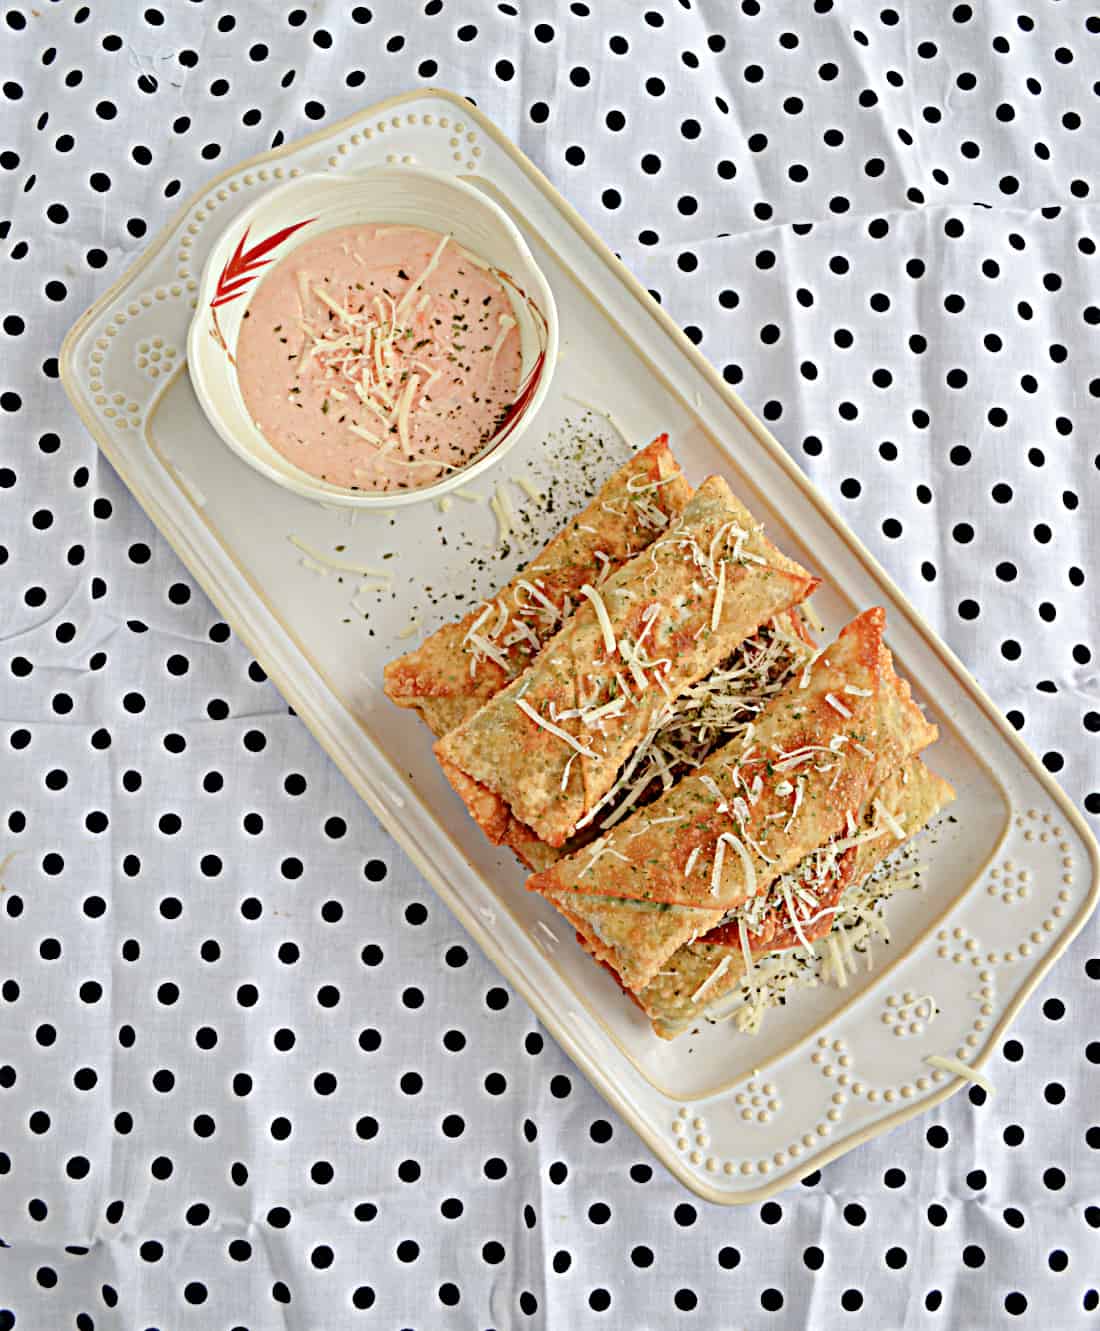 A white platter piled high with crispy egg rolls and served with a small white bowl of spicy dipping sauce on a black and white polka dot background.